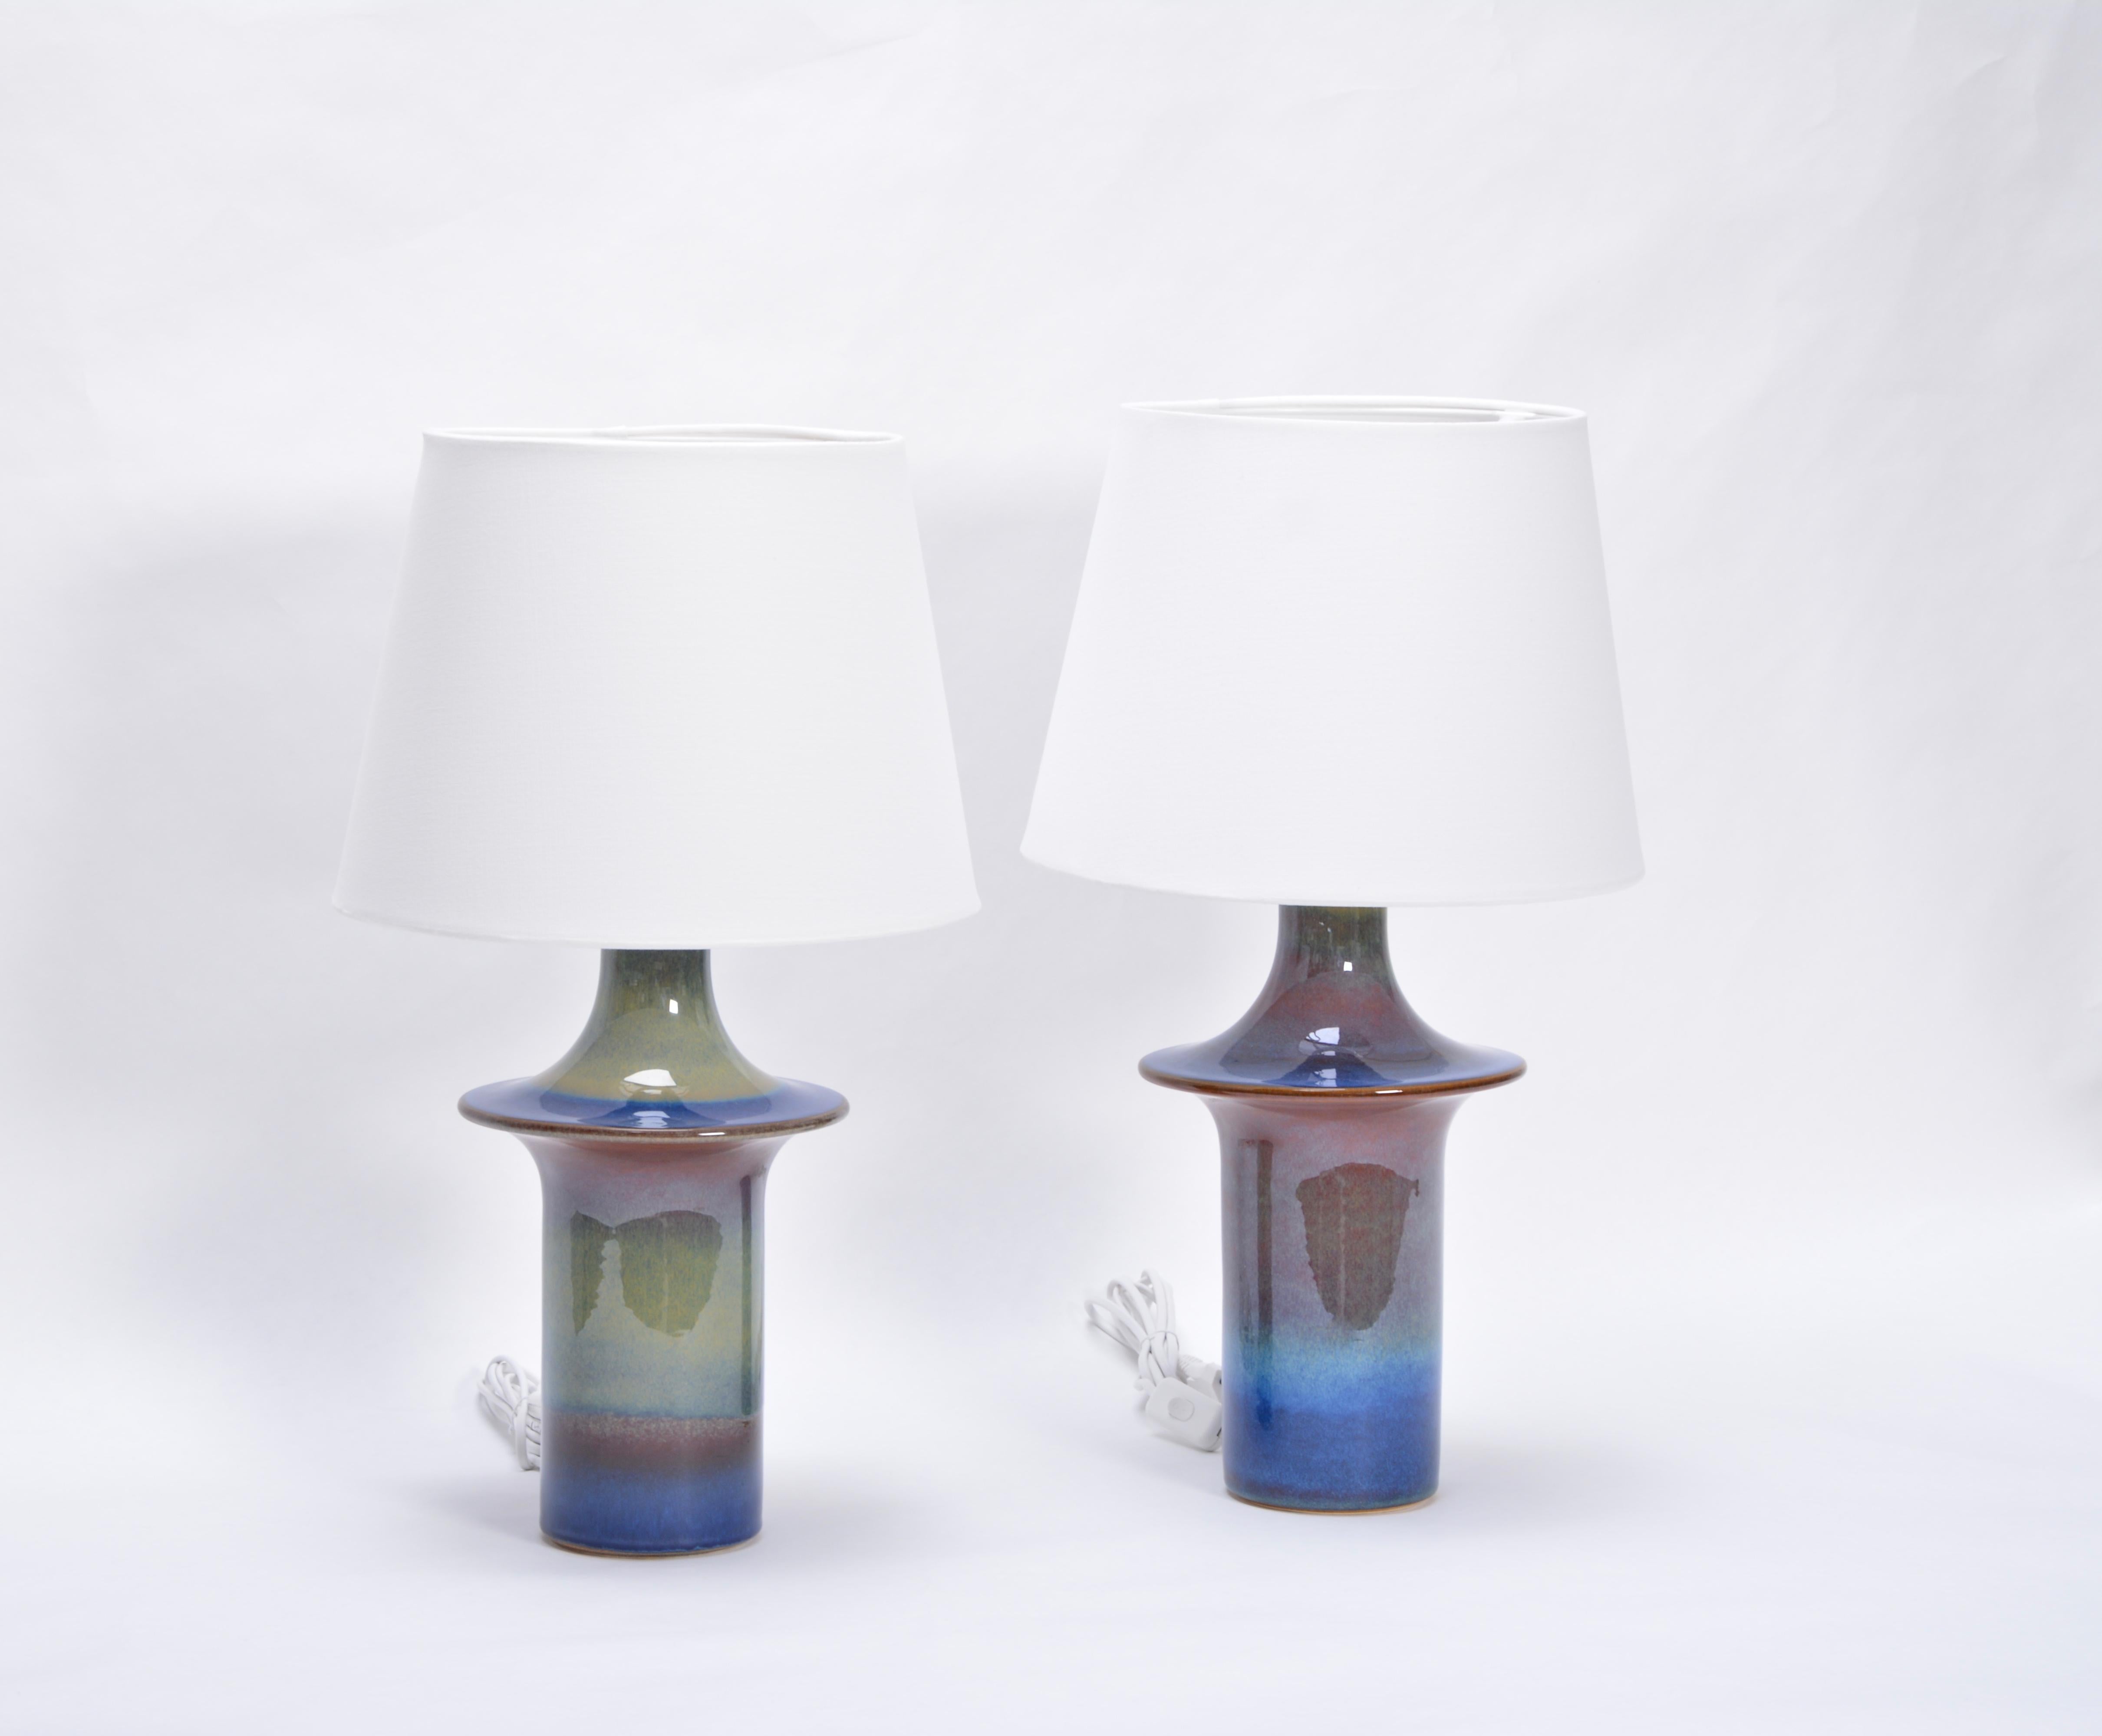 Pair of ceramic table lamps with beautiful glazing in different blue tones produced by Danish company Soholm Stentoj. The lamps have been rewired for European use and have new shades. To be checked by a local electrician before put to use.
Søholm